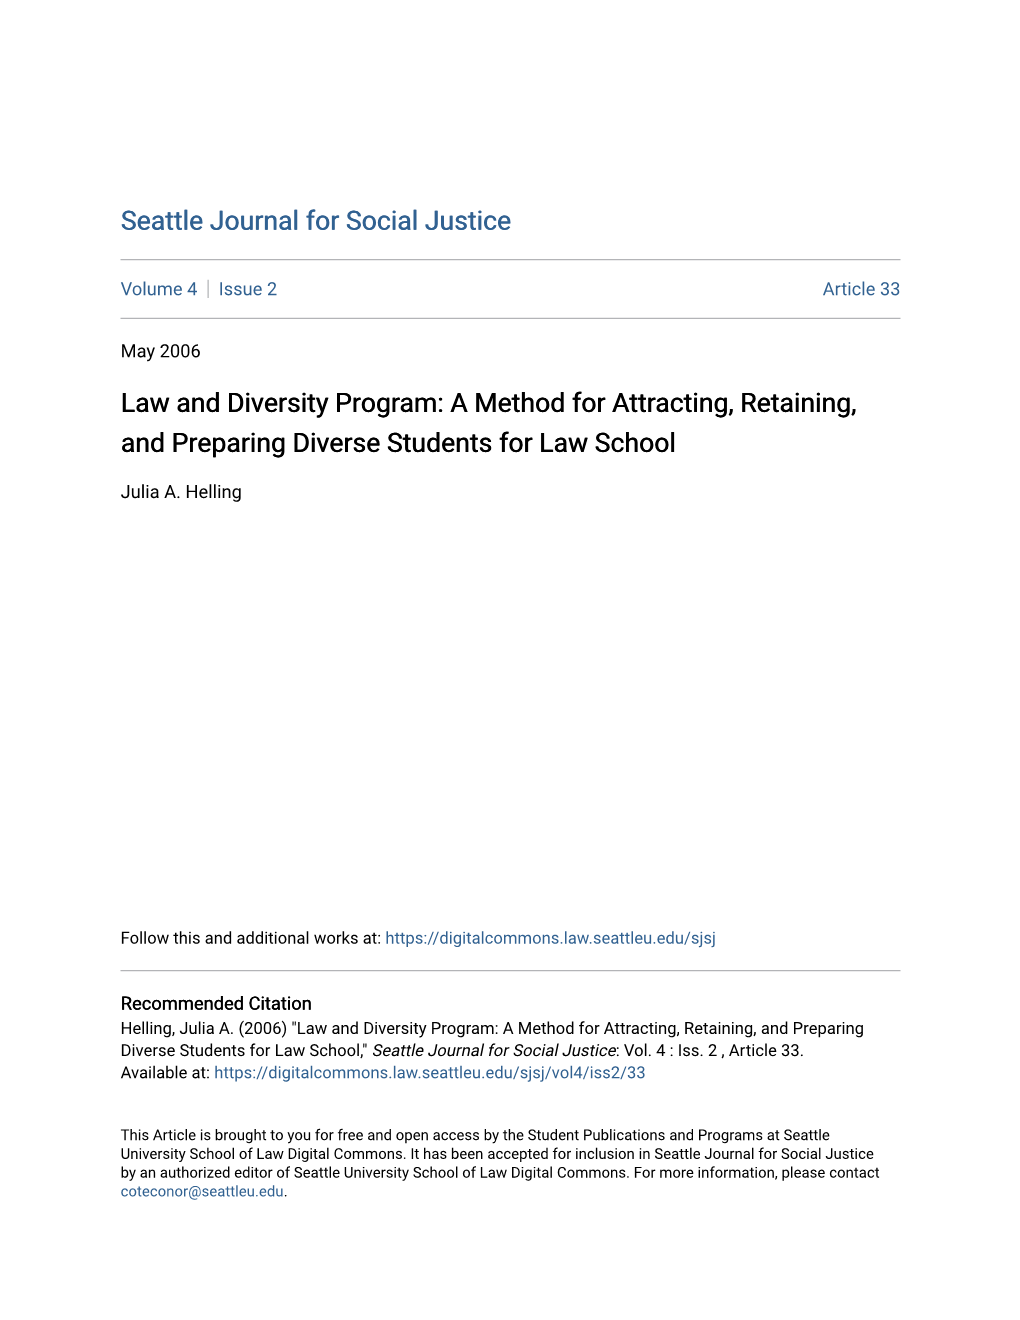 Law and Diversity Program: a Method for Attracting, Retaining, and Preparing Diverse Students for Law School